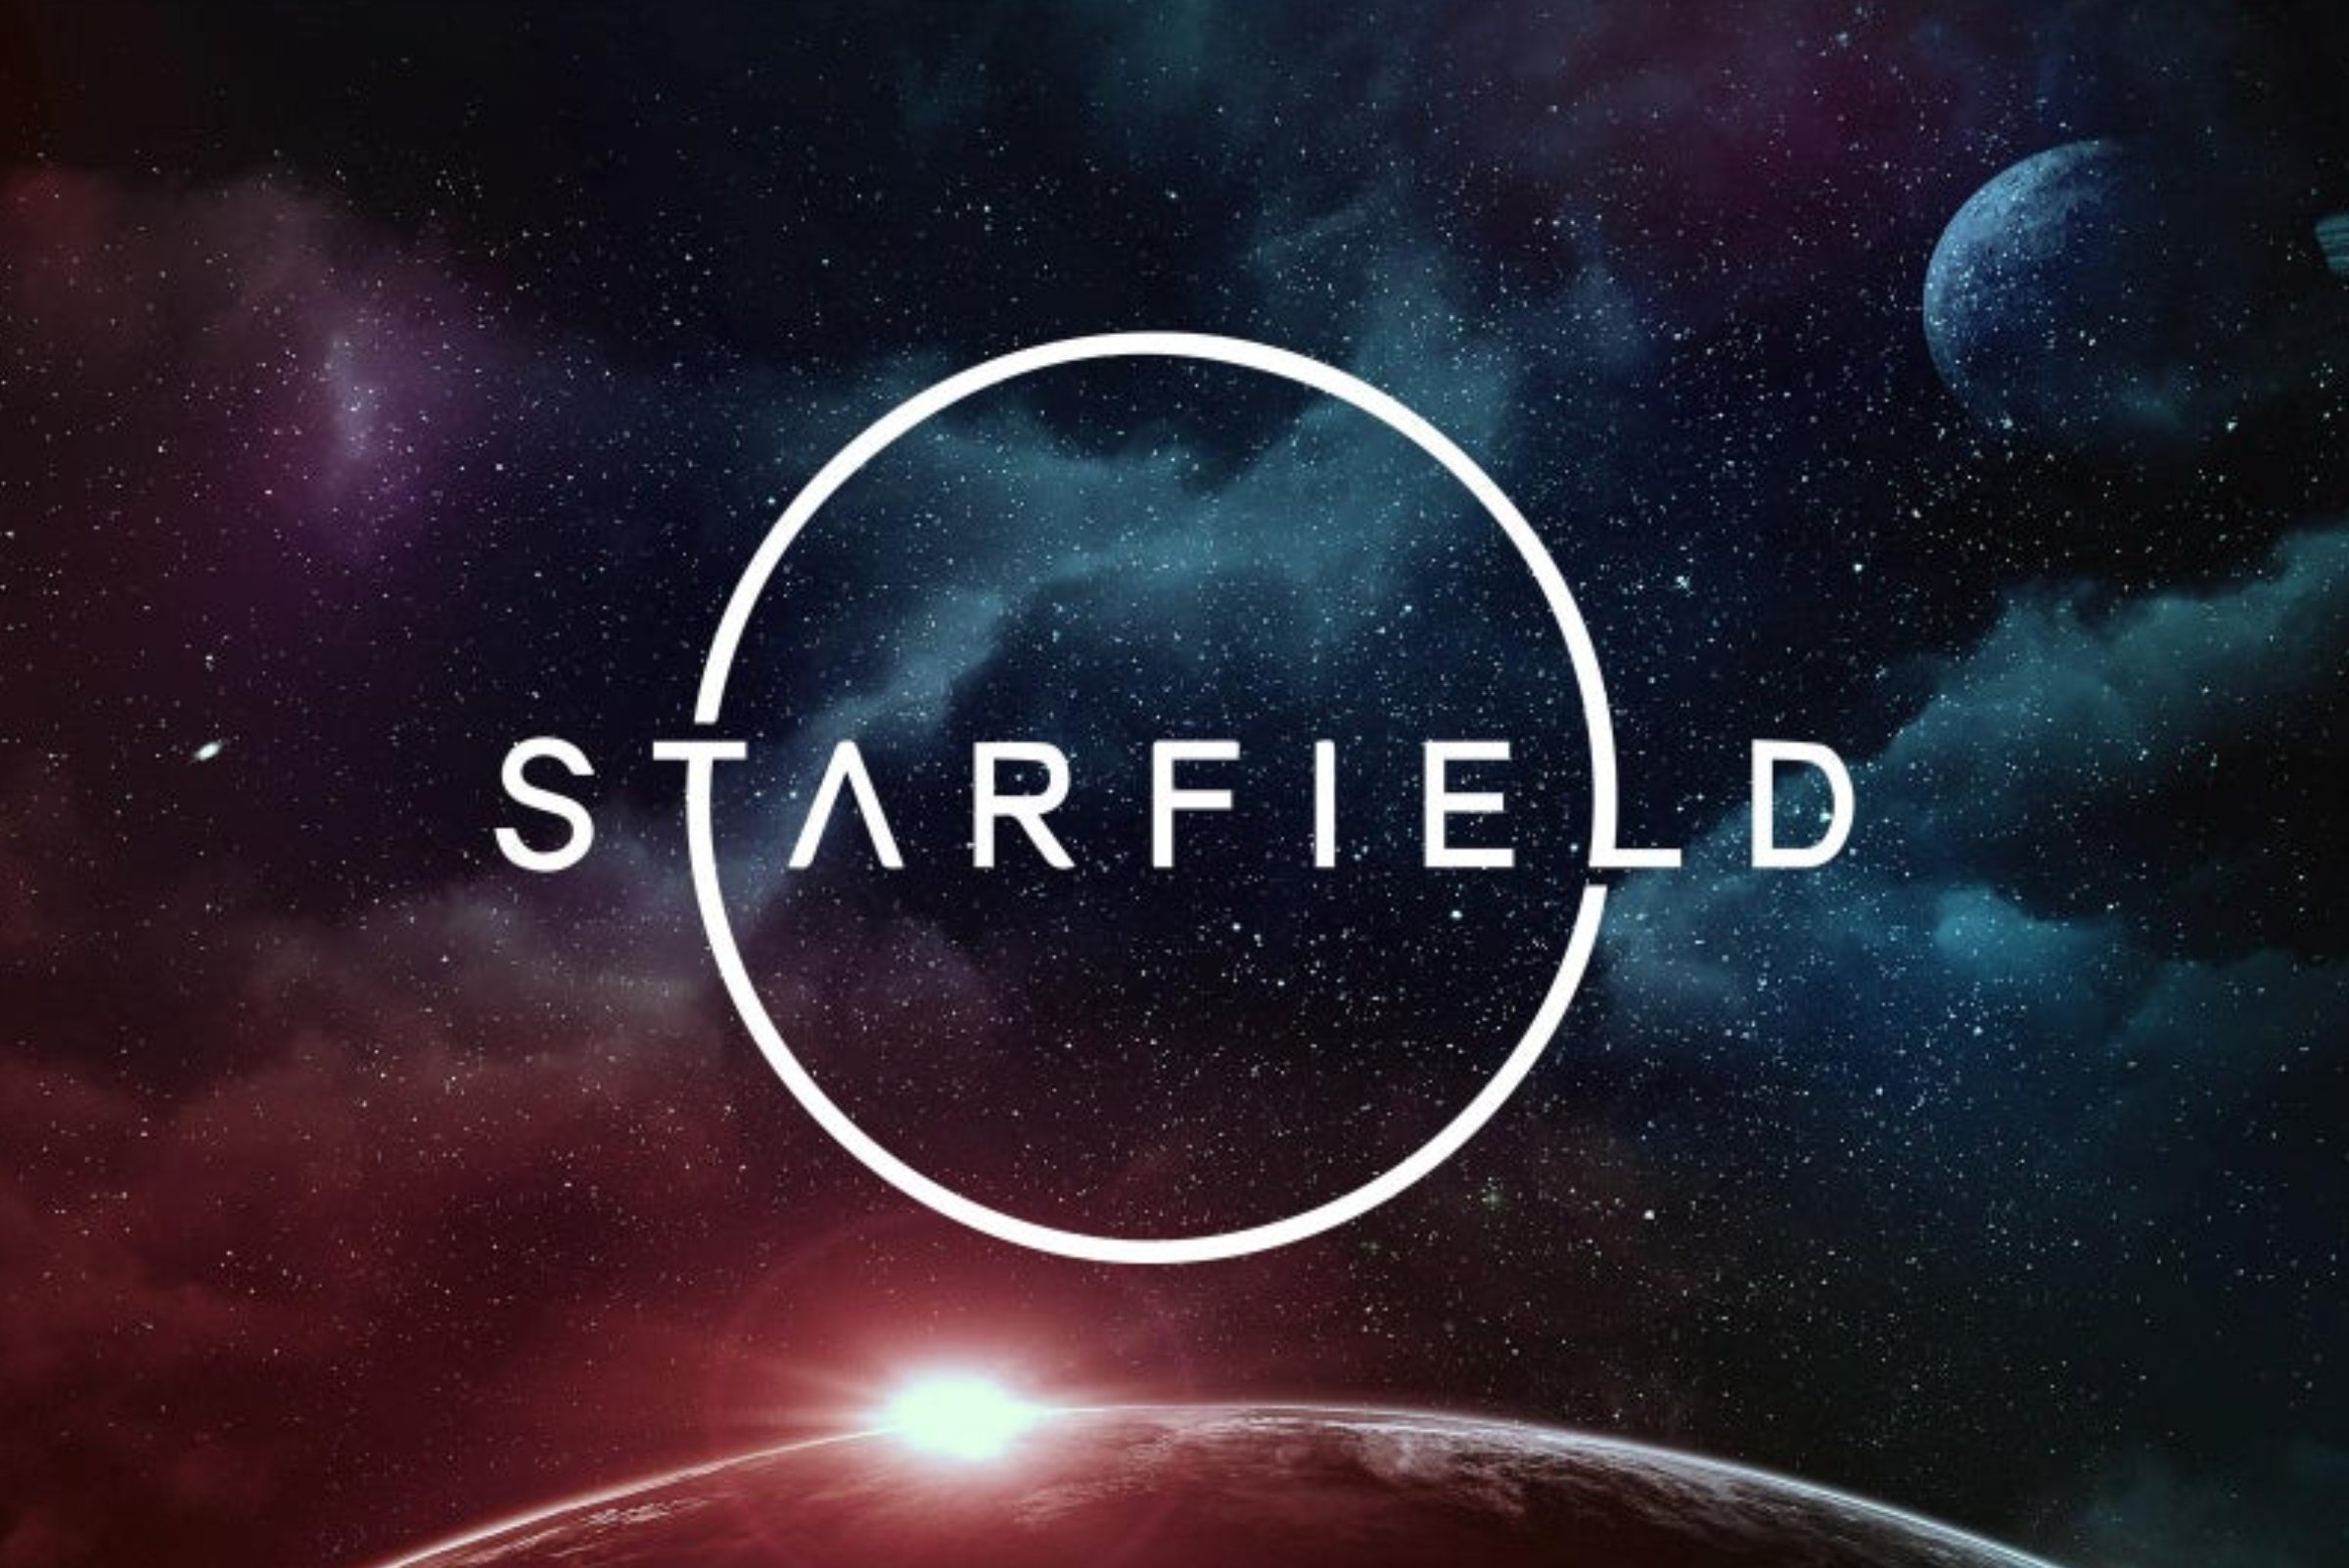 50 Starfield HD Wallpapers and Backgrounds